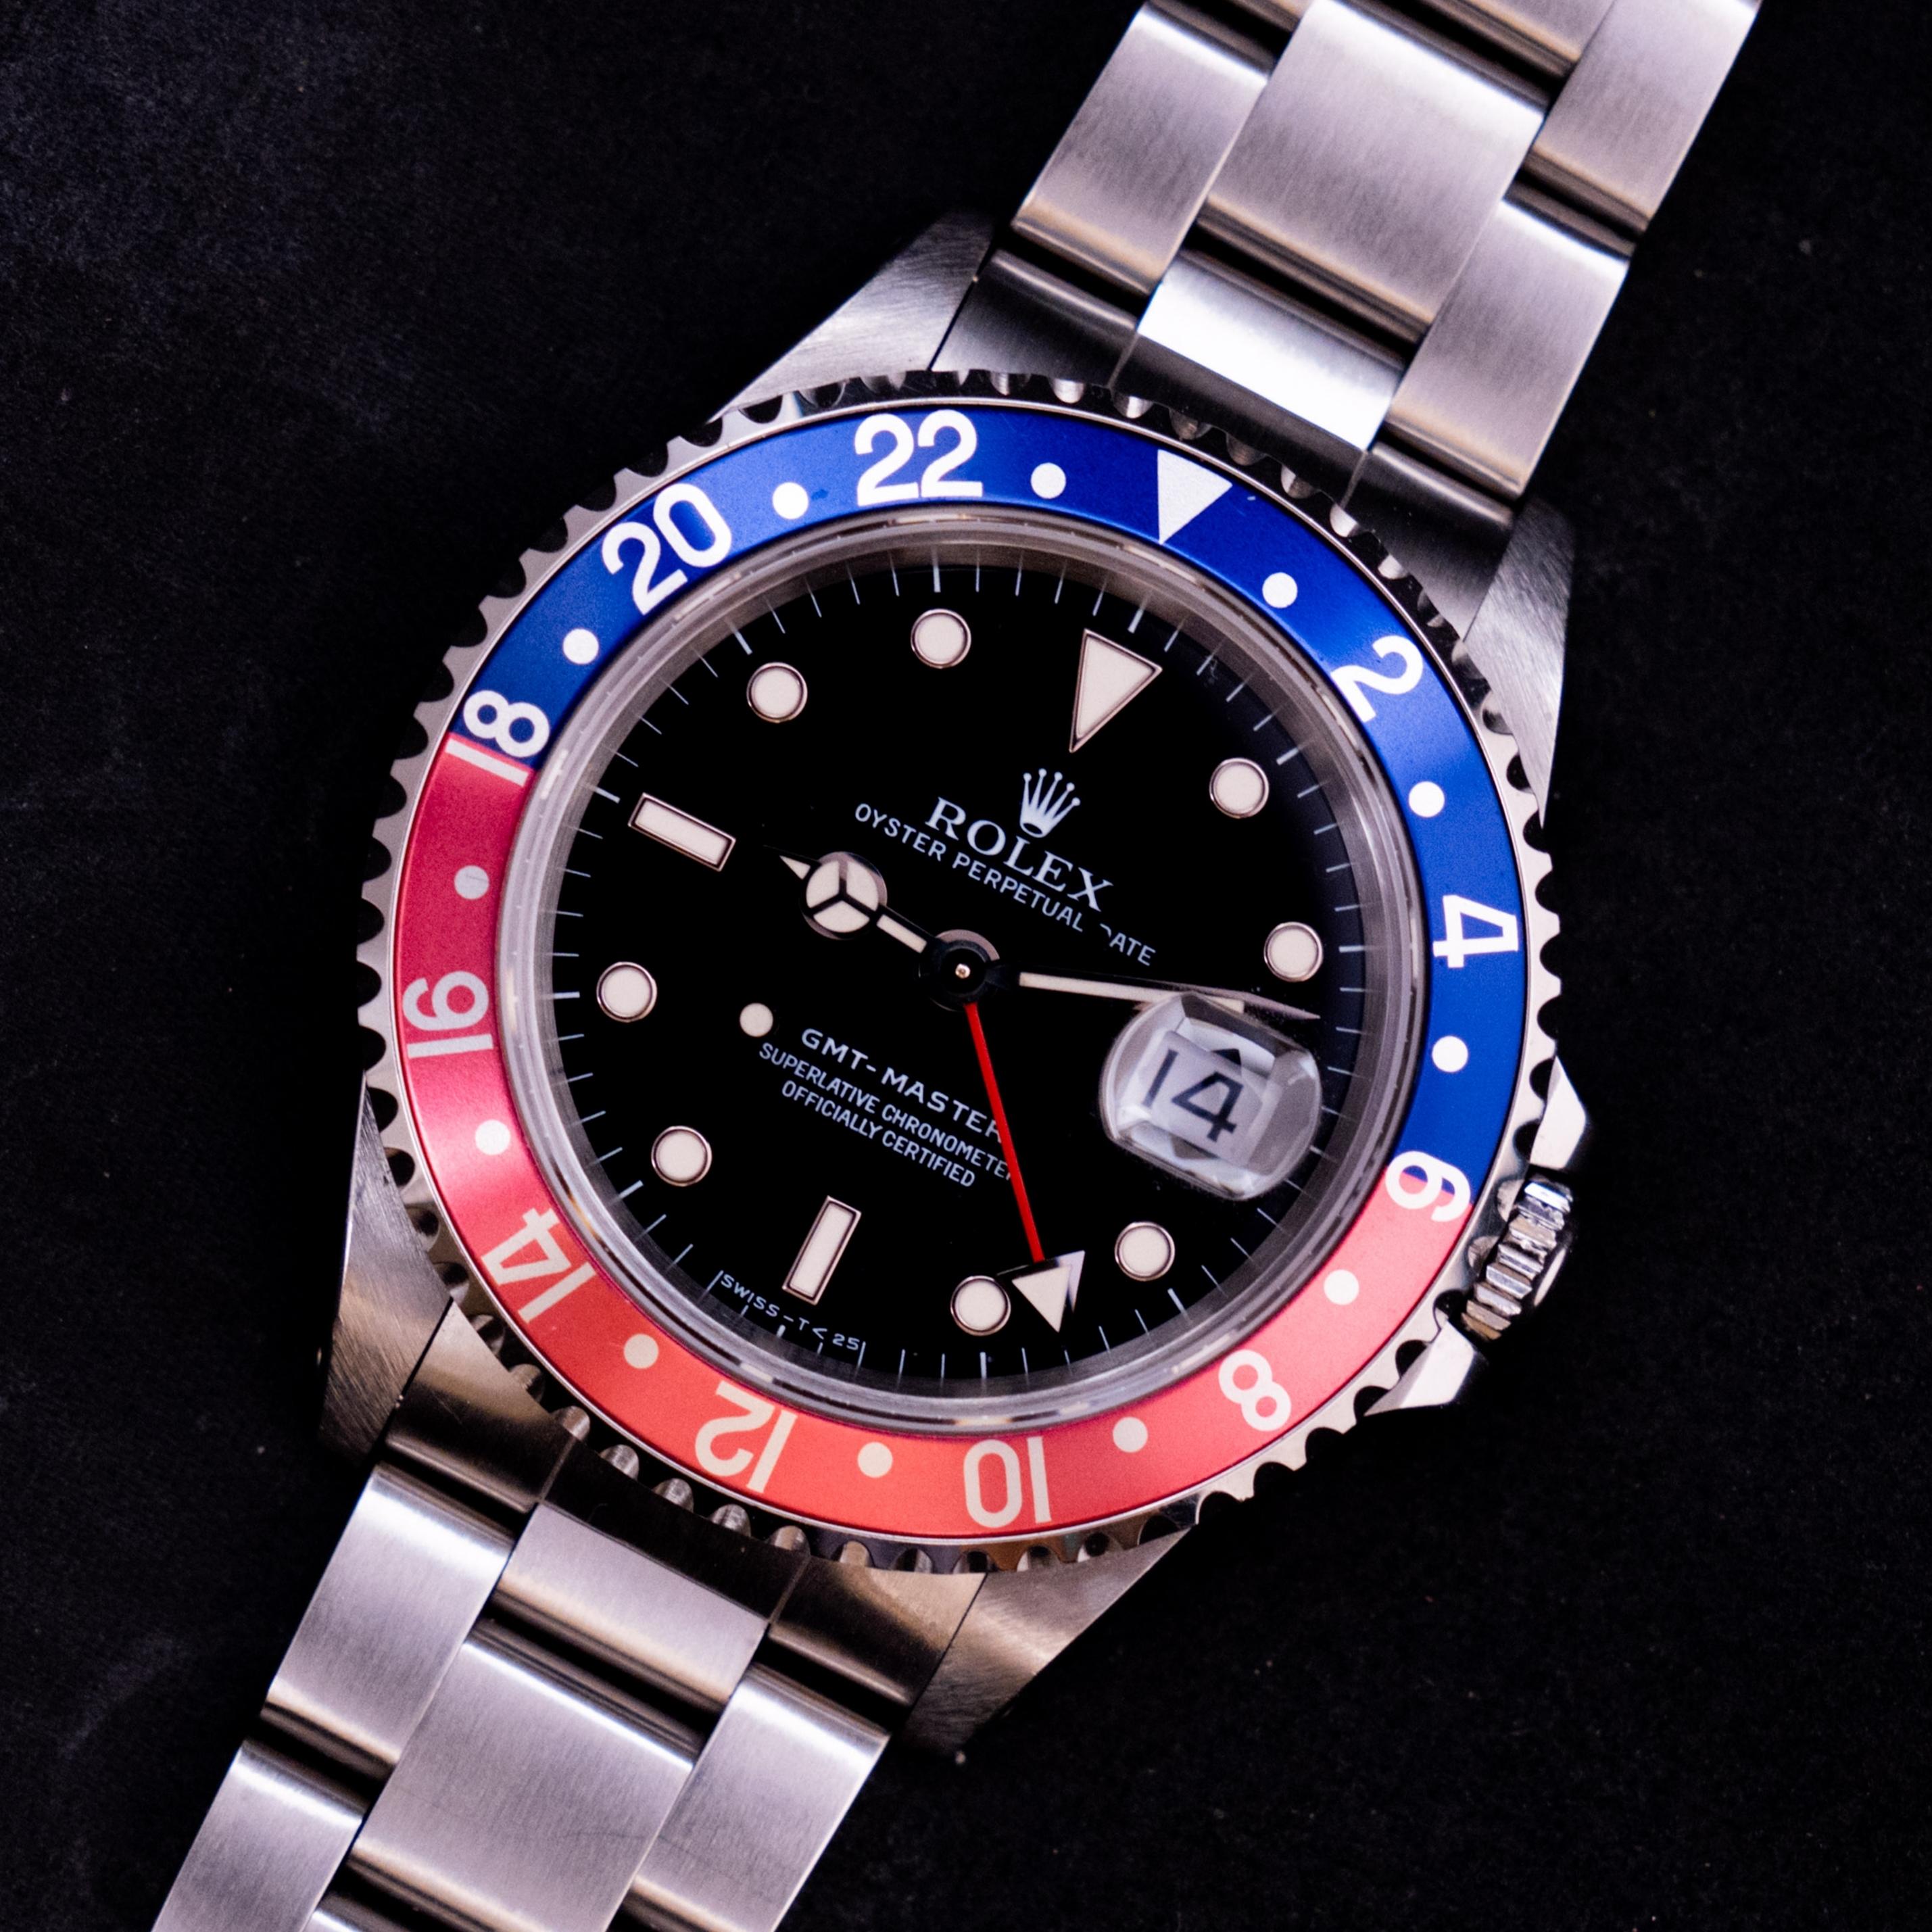 Brand: Rolex
Model: 16700
Year: 1996
Serial number: T6xxxxx
Reference: OT1971

Case: Show sign of wear w/ slight polish from previous ; inner case back stamped 16700

Dial: Excellent Condition Black Tritium Dial where the lumes have turned into